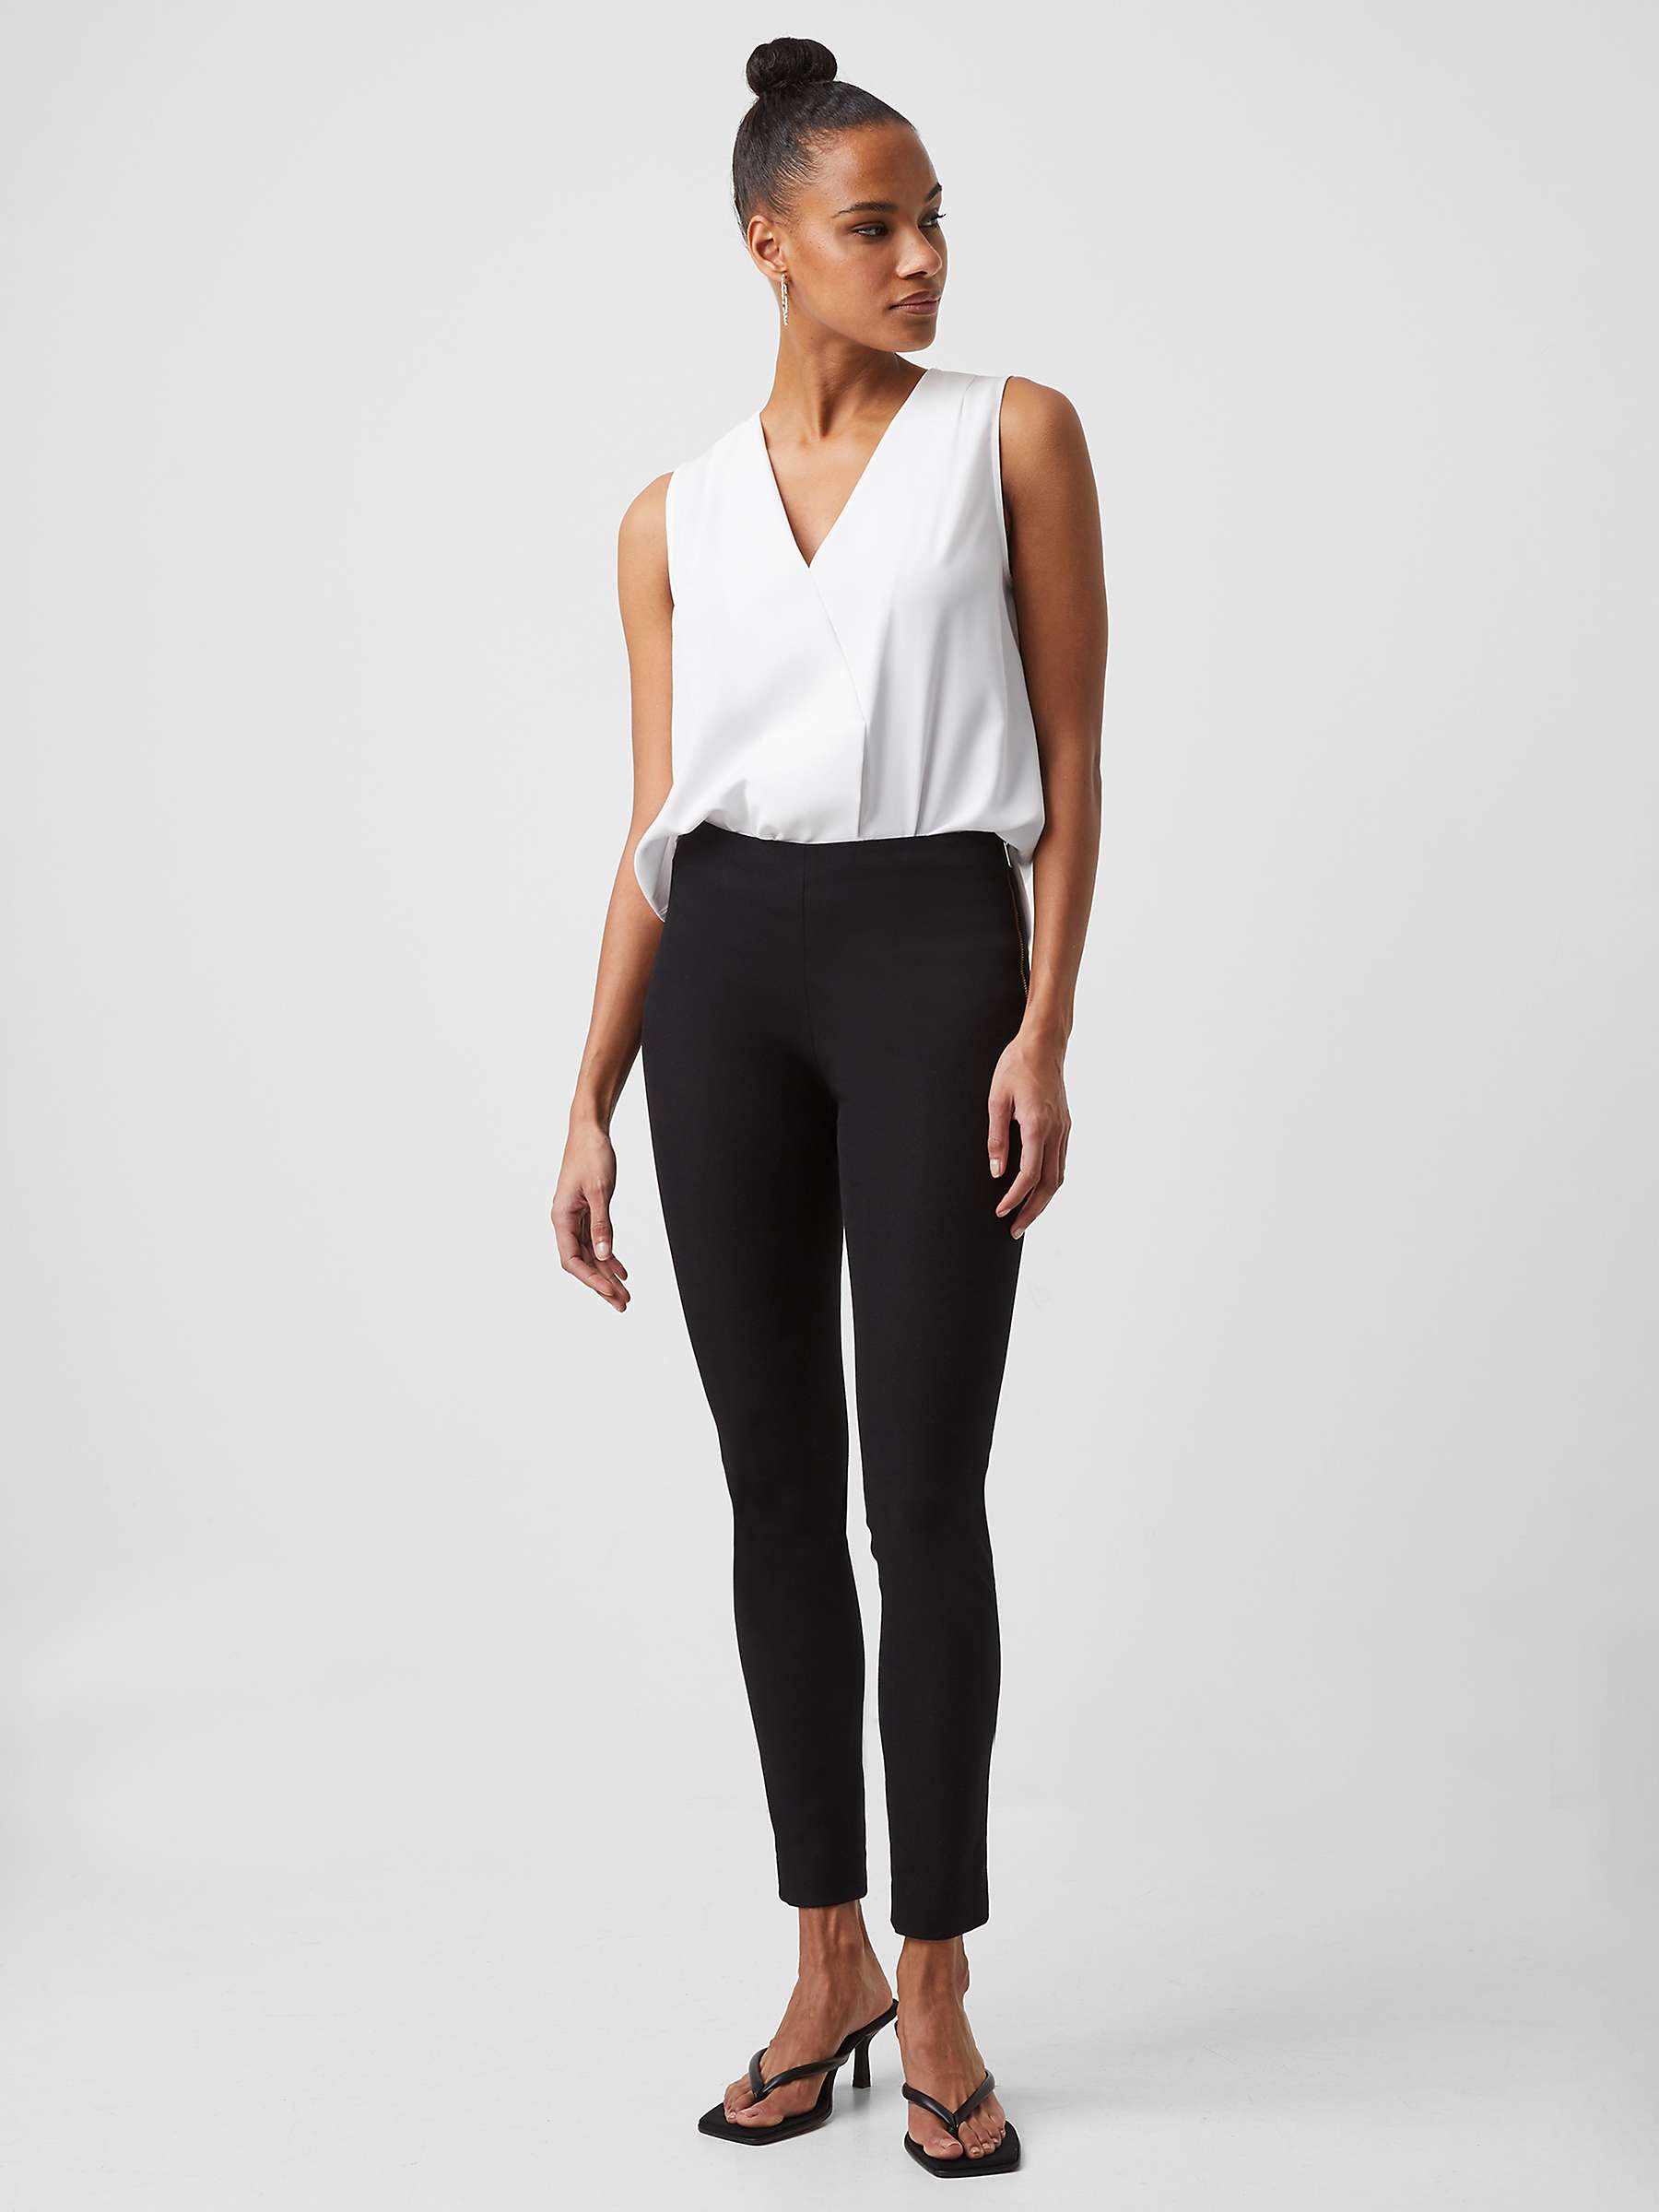 Buy French Connection Street Skinny Trousers Online at johnlewis.com